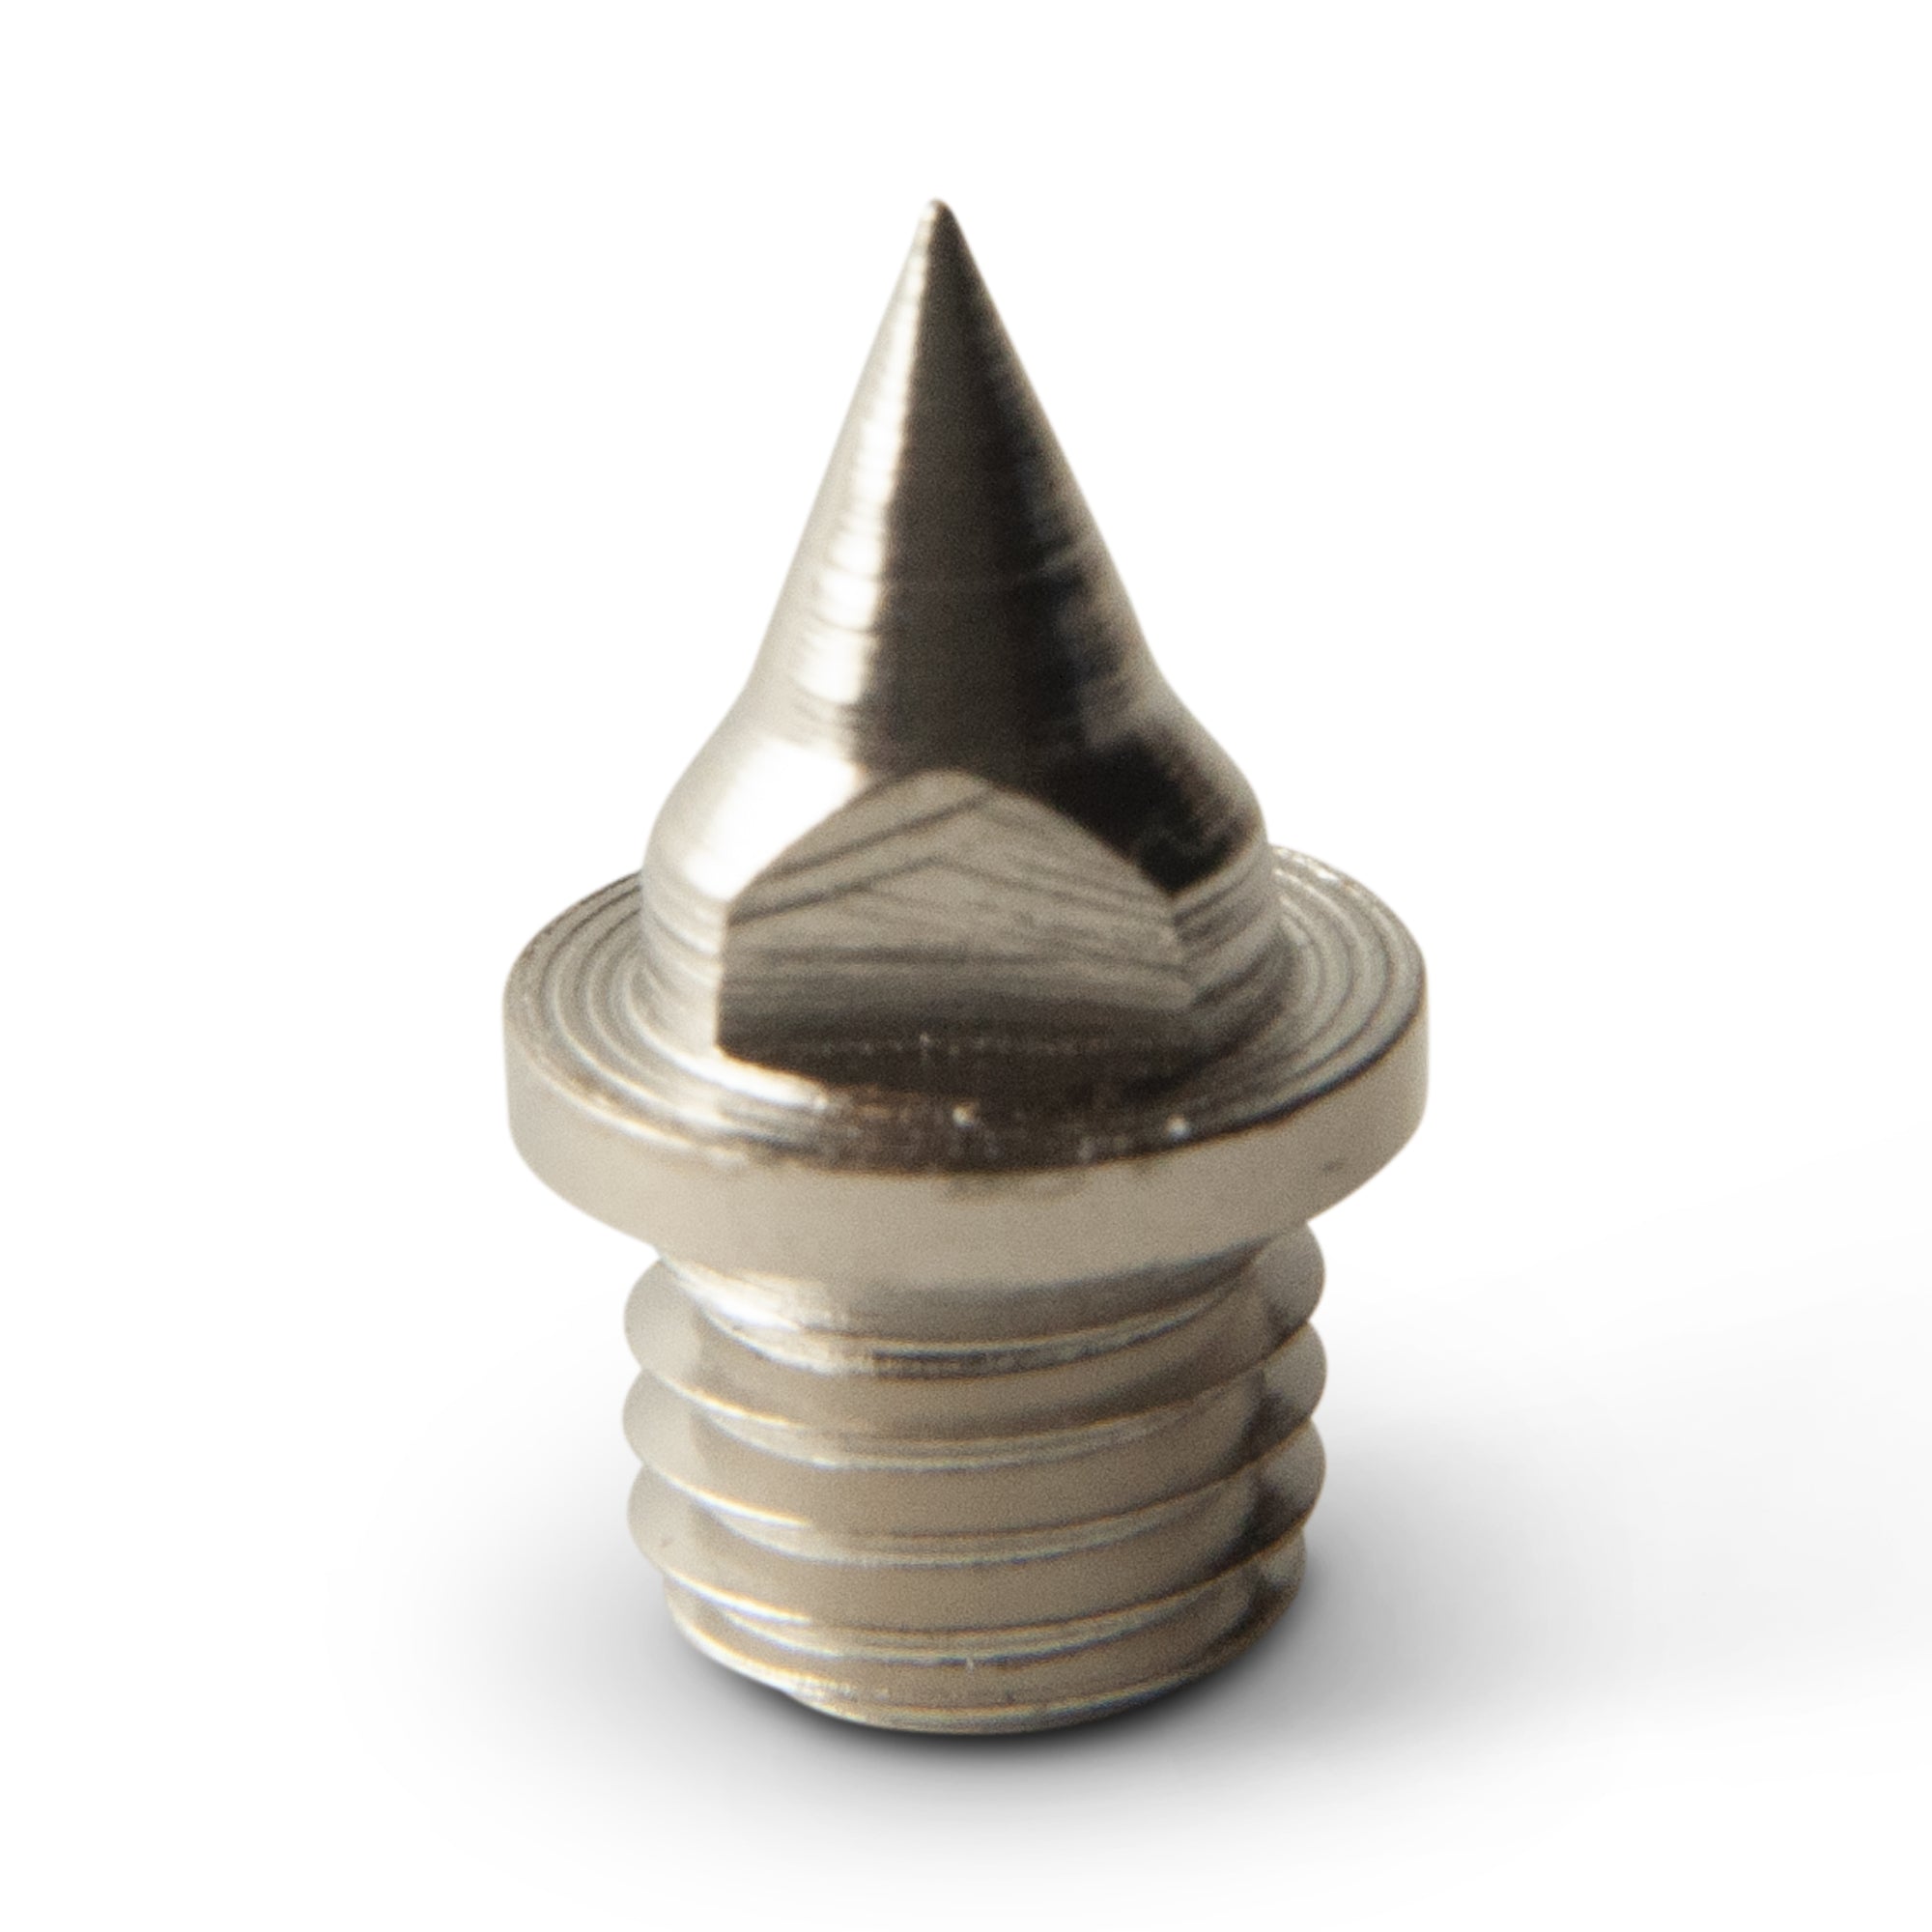 Track Running Spikes Pins for spike shoes | 6mm Steel Pyramid shaped